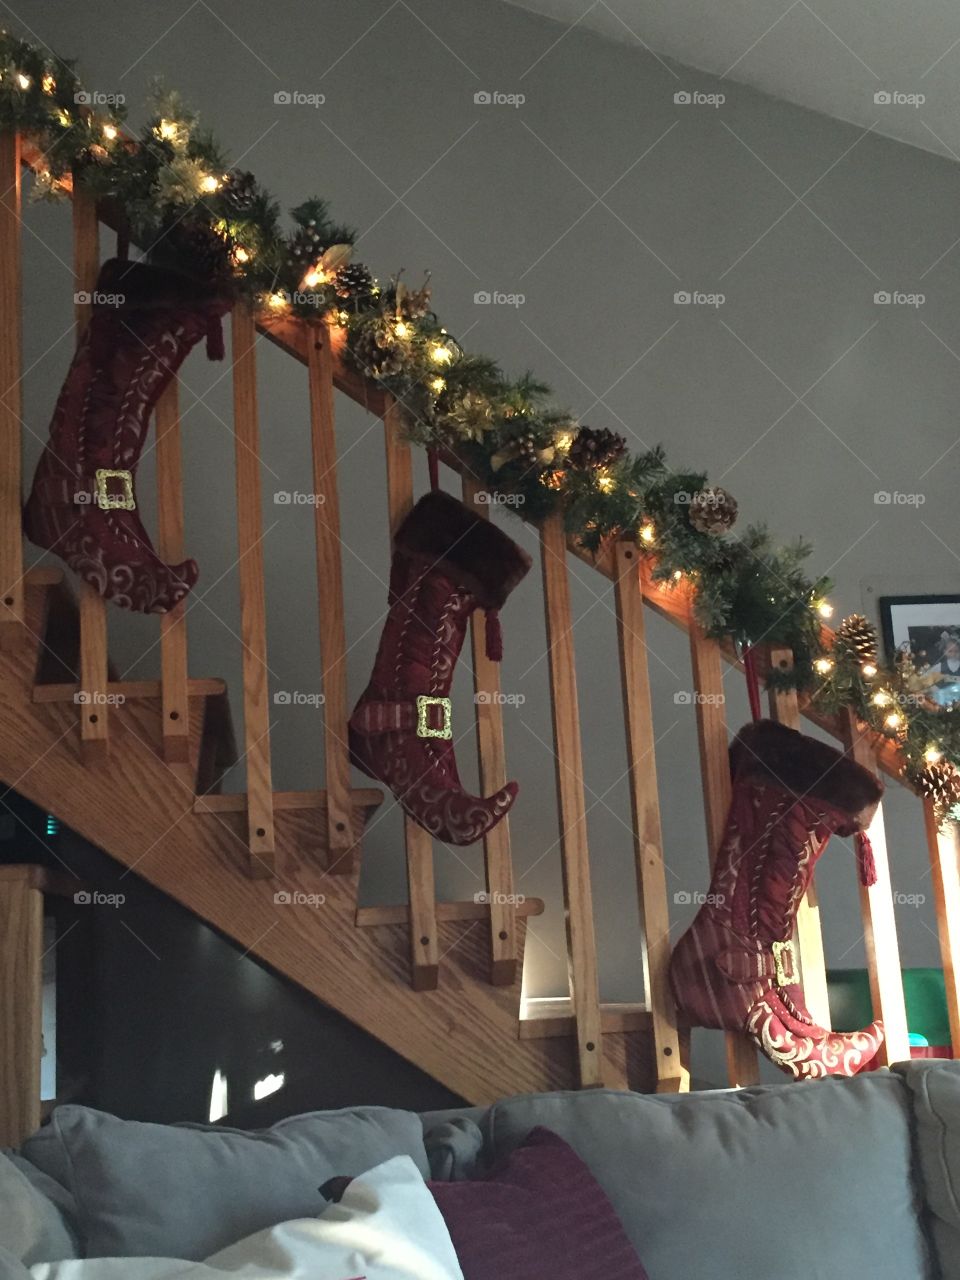 Stockings are hung!!